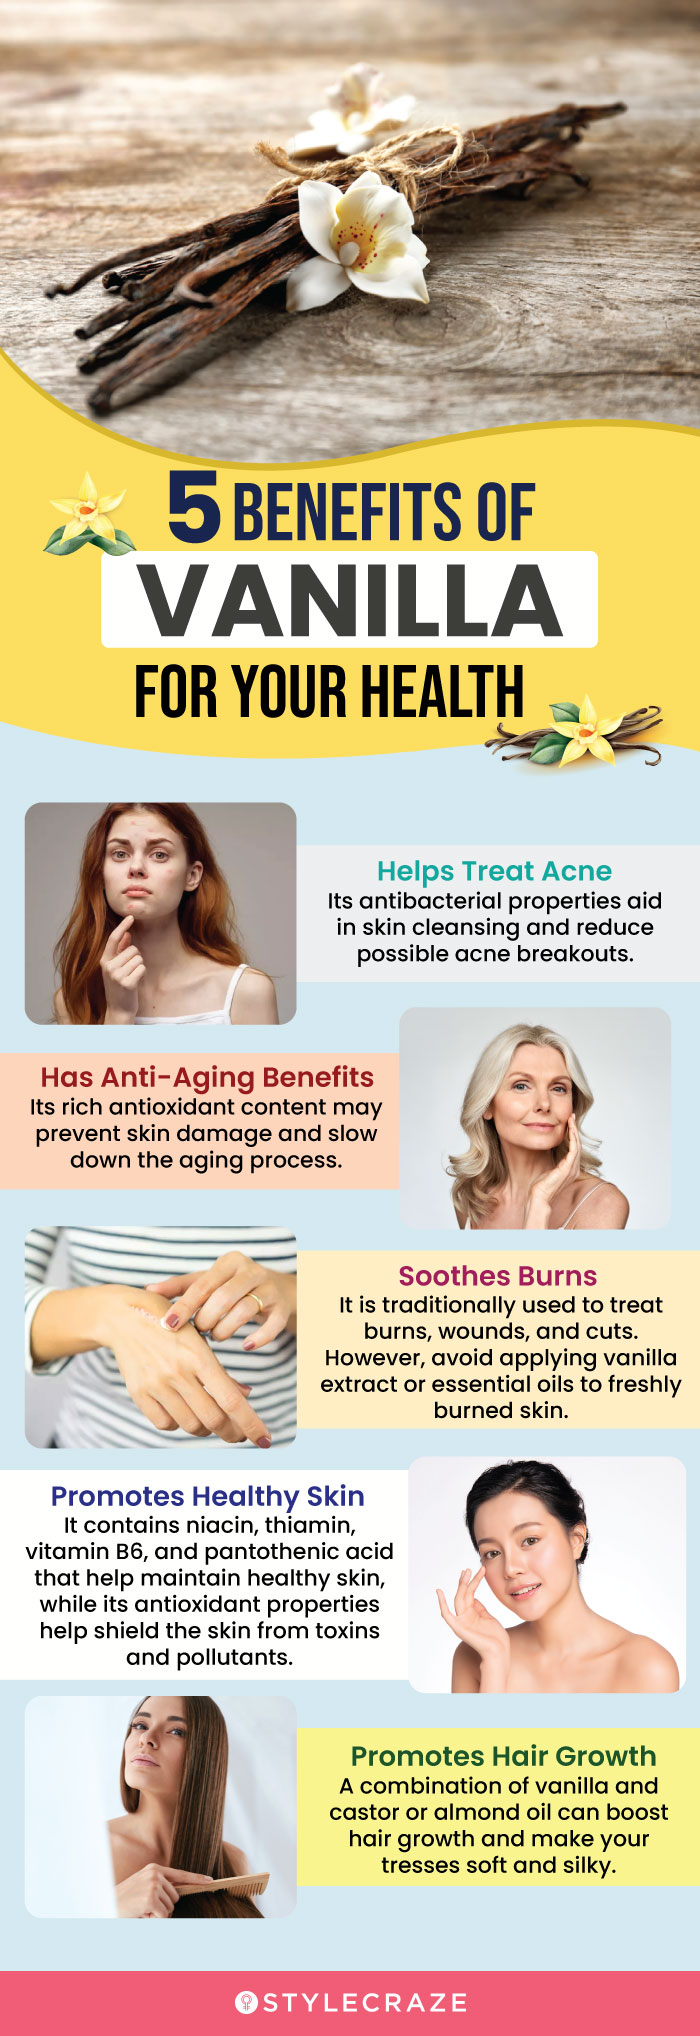 5 benefits of vanilla for your health (infographic)